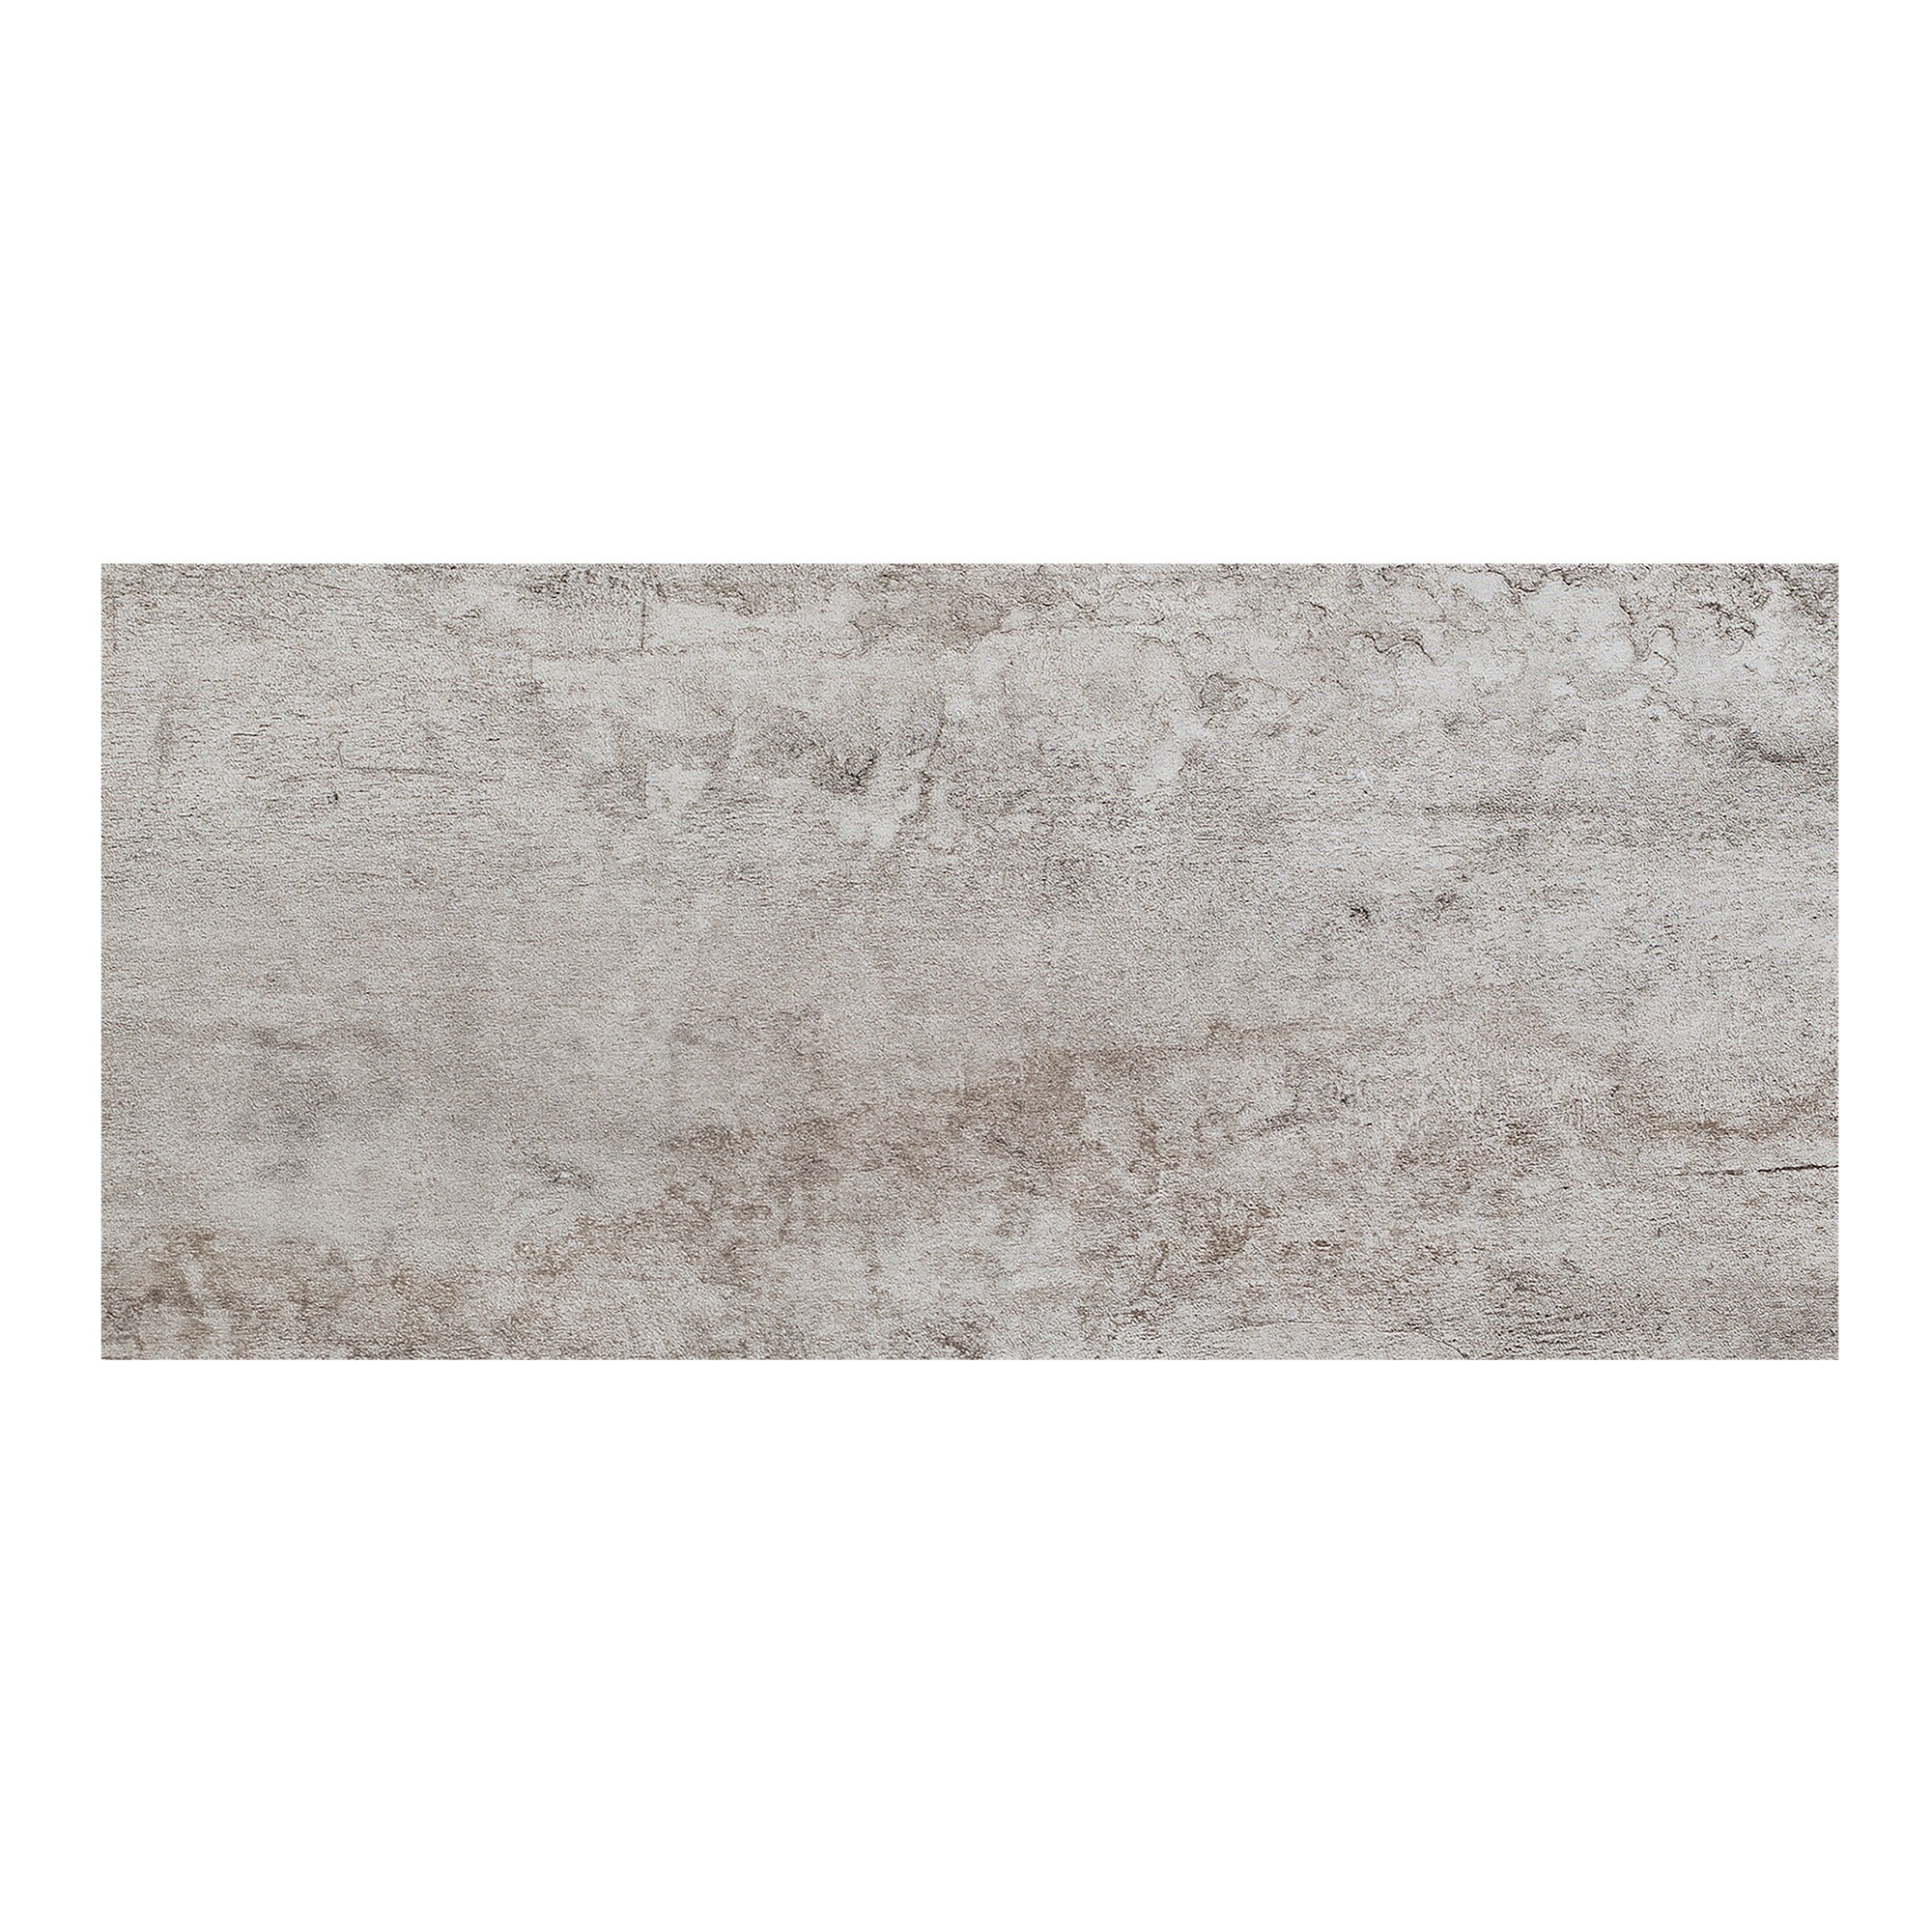 Ivy Hill Tile Paris Gray Beveled 3x6 Antique Mirror Subway Tile for Wall Backsplash and Wall